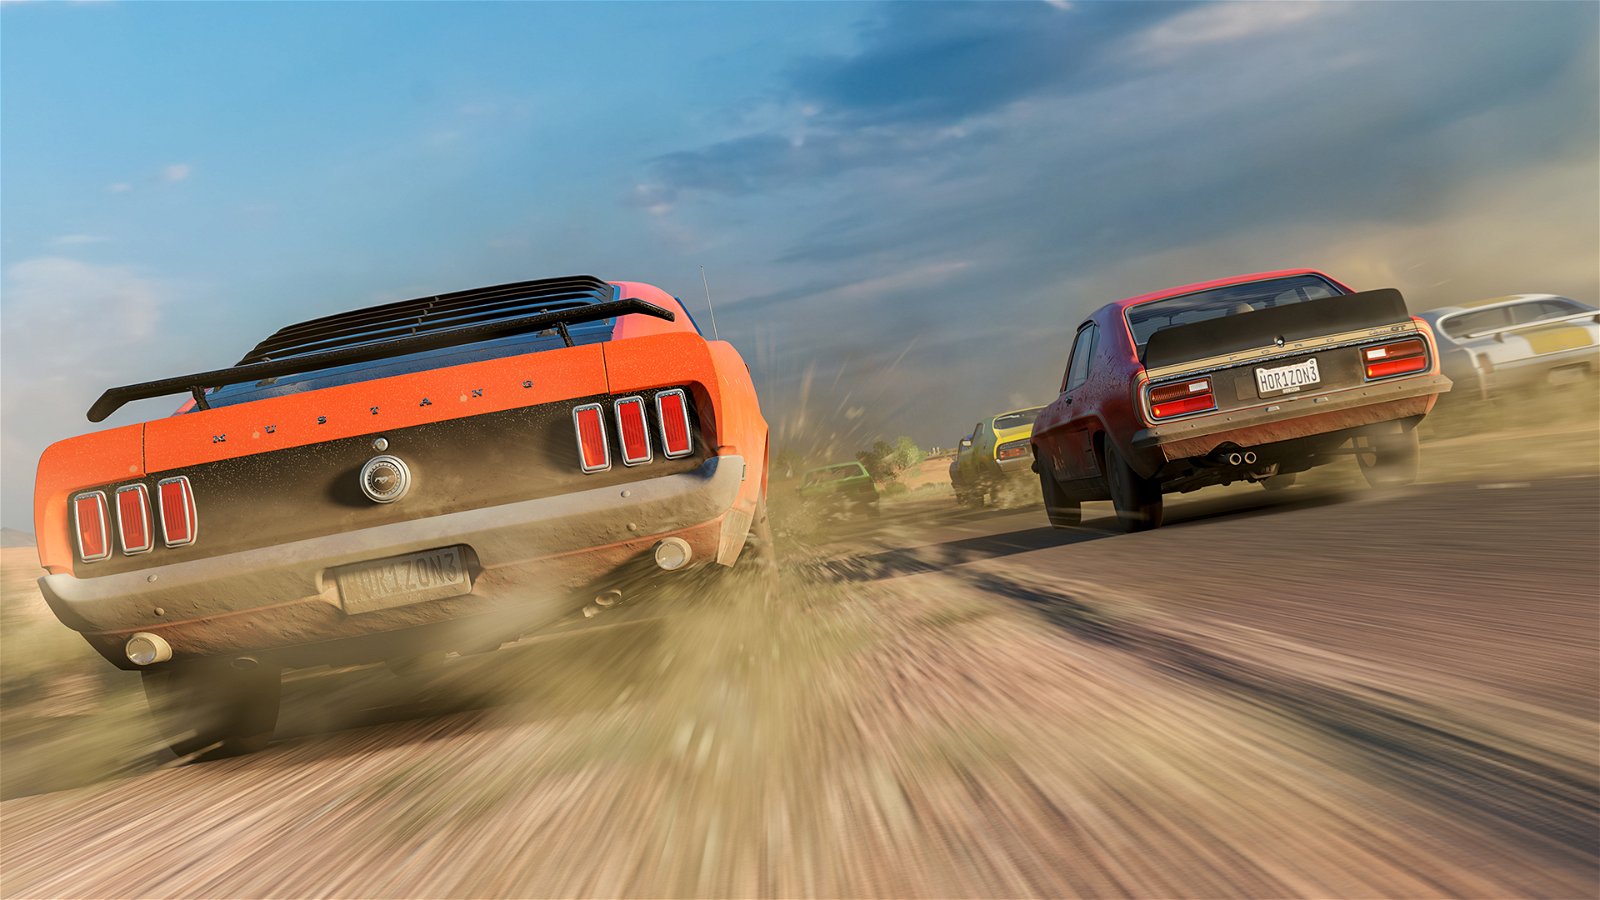 Clearest Blue Sky: A Preview of Forza Horizon 3